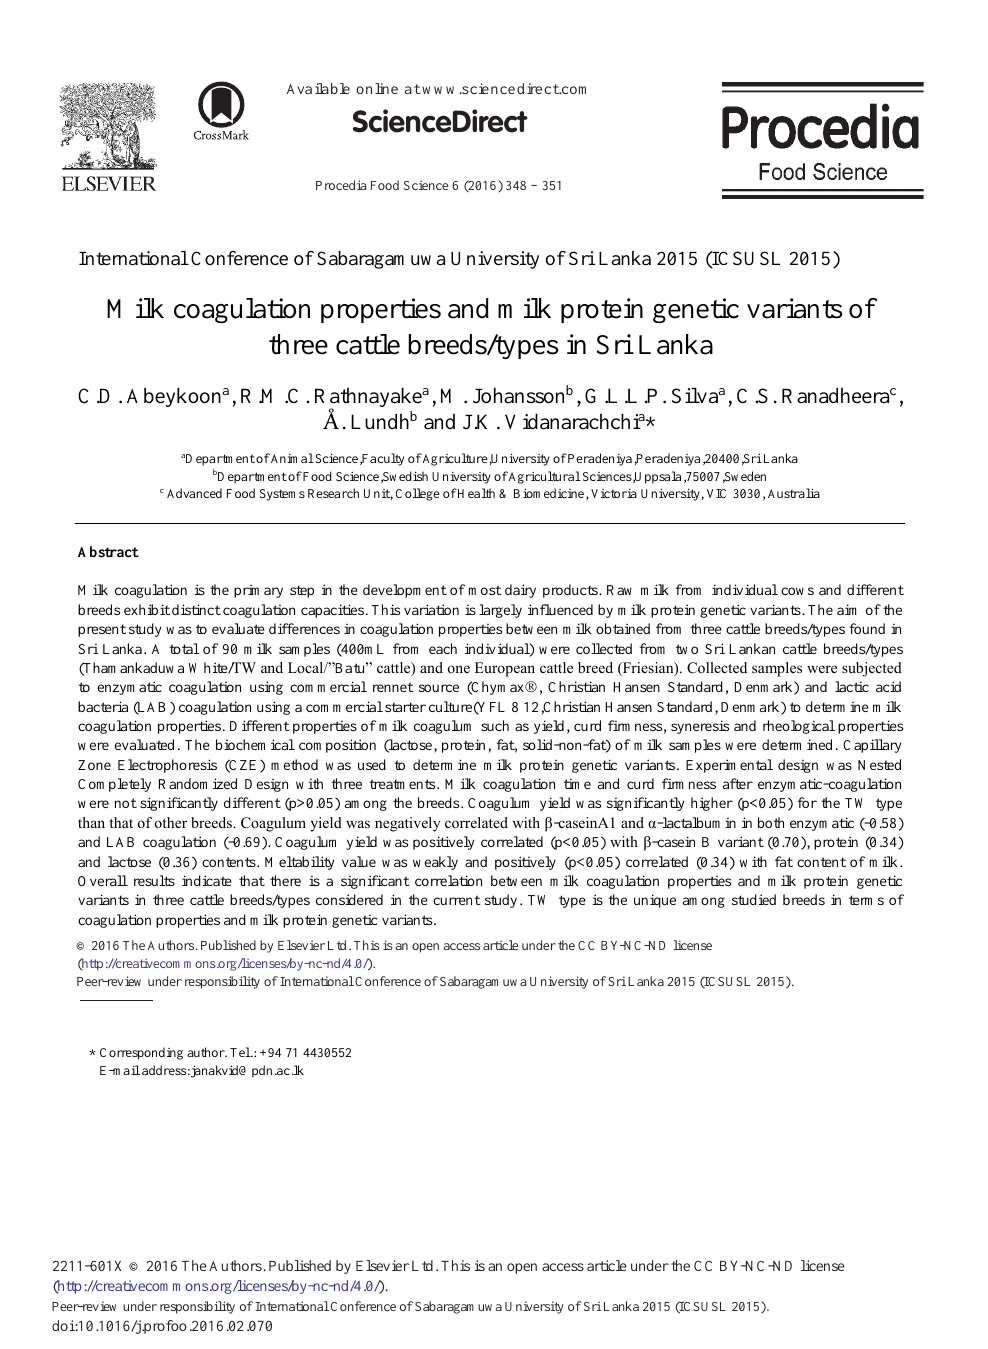 Milk Coagulation Properties And Milk Protein Genetic Variants Of Three Cattle Breeds Types In Sri Lanka Topic Of Research Paper In Agriculture Forestry And Fisheries Download Scholarly Article Pdf And Read For